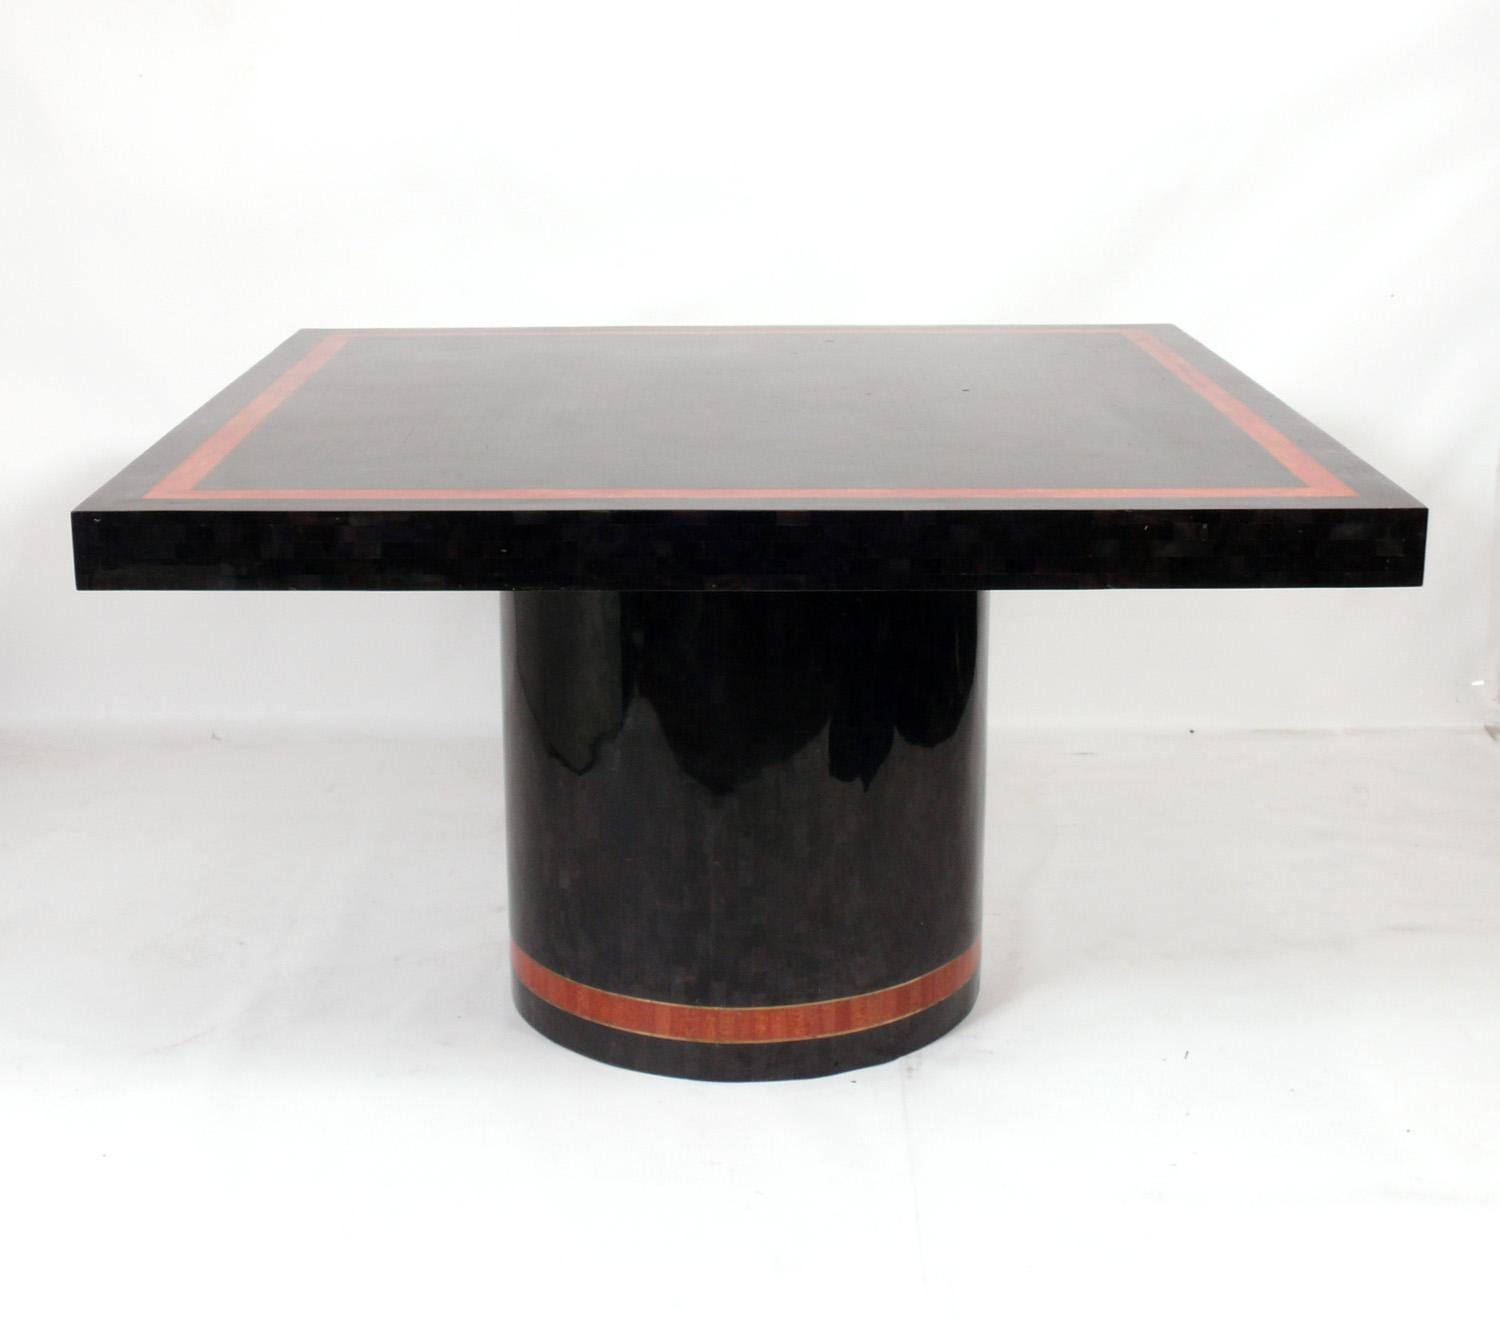 Tessellated marble dining table, American, circa 1970s. Outstanding color combination with the black and deep coral orange color tessellated marble with inset brass inlay. Thick substantial tabletop and heavyweight construction. Please see our other